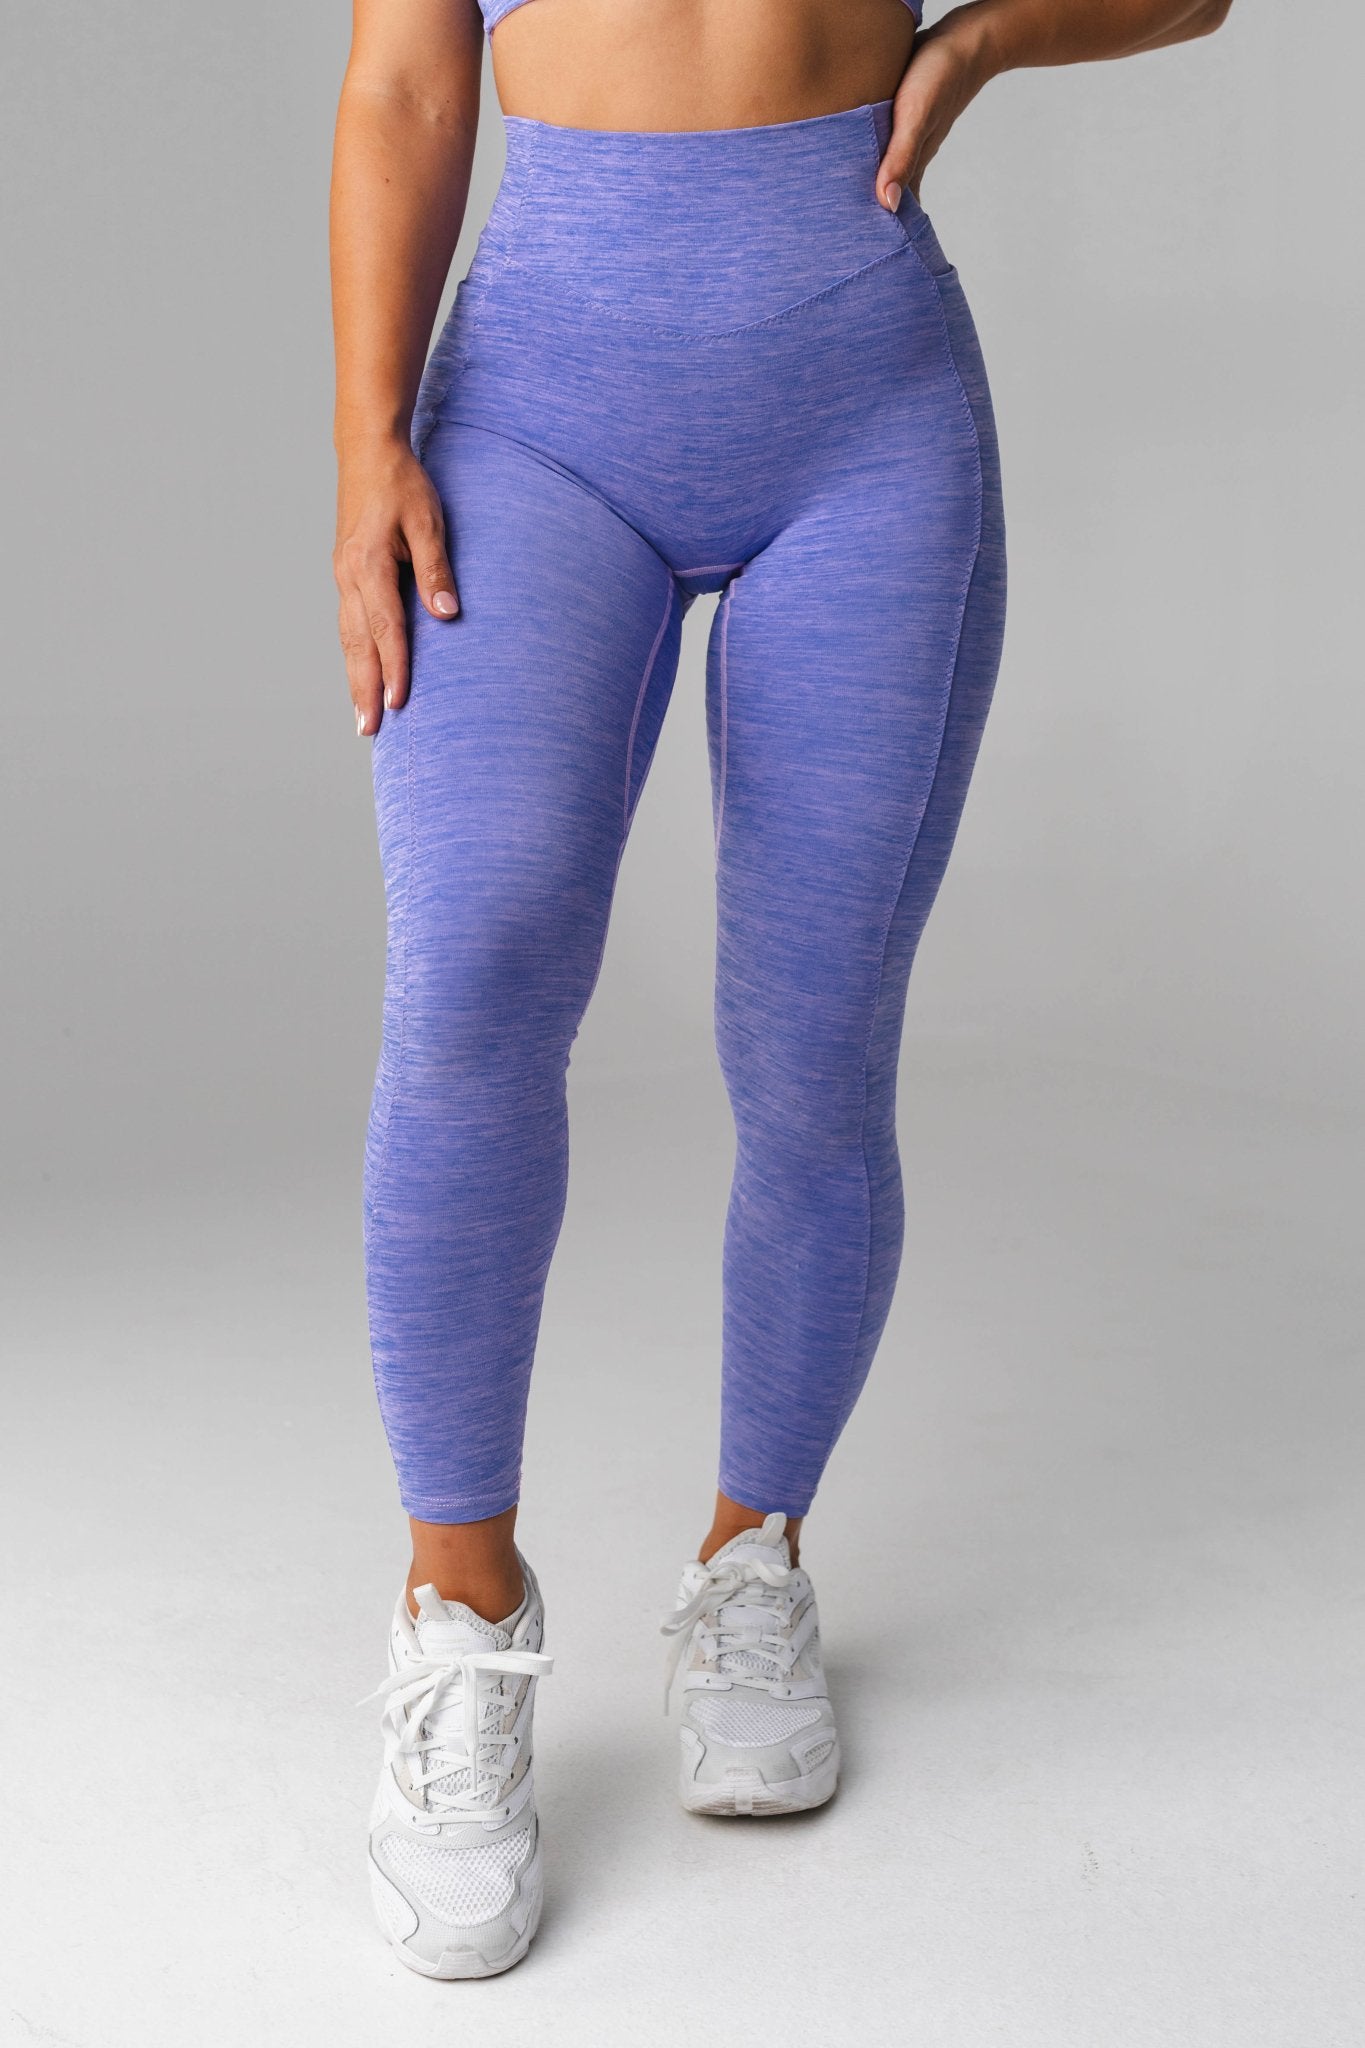 Women's Workout Tights - Capri Tights | Cotton On